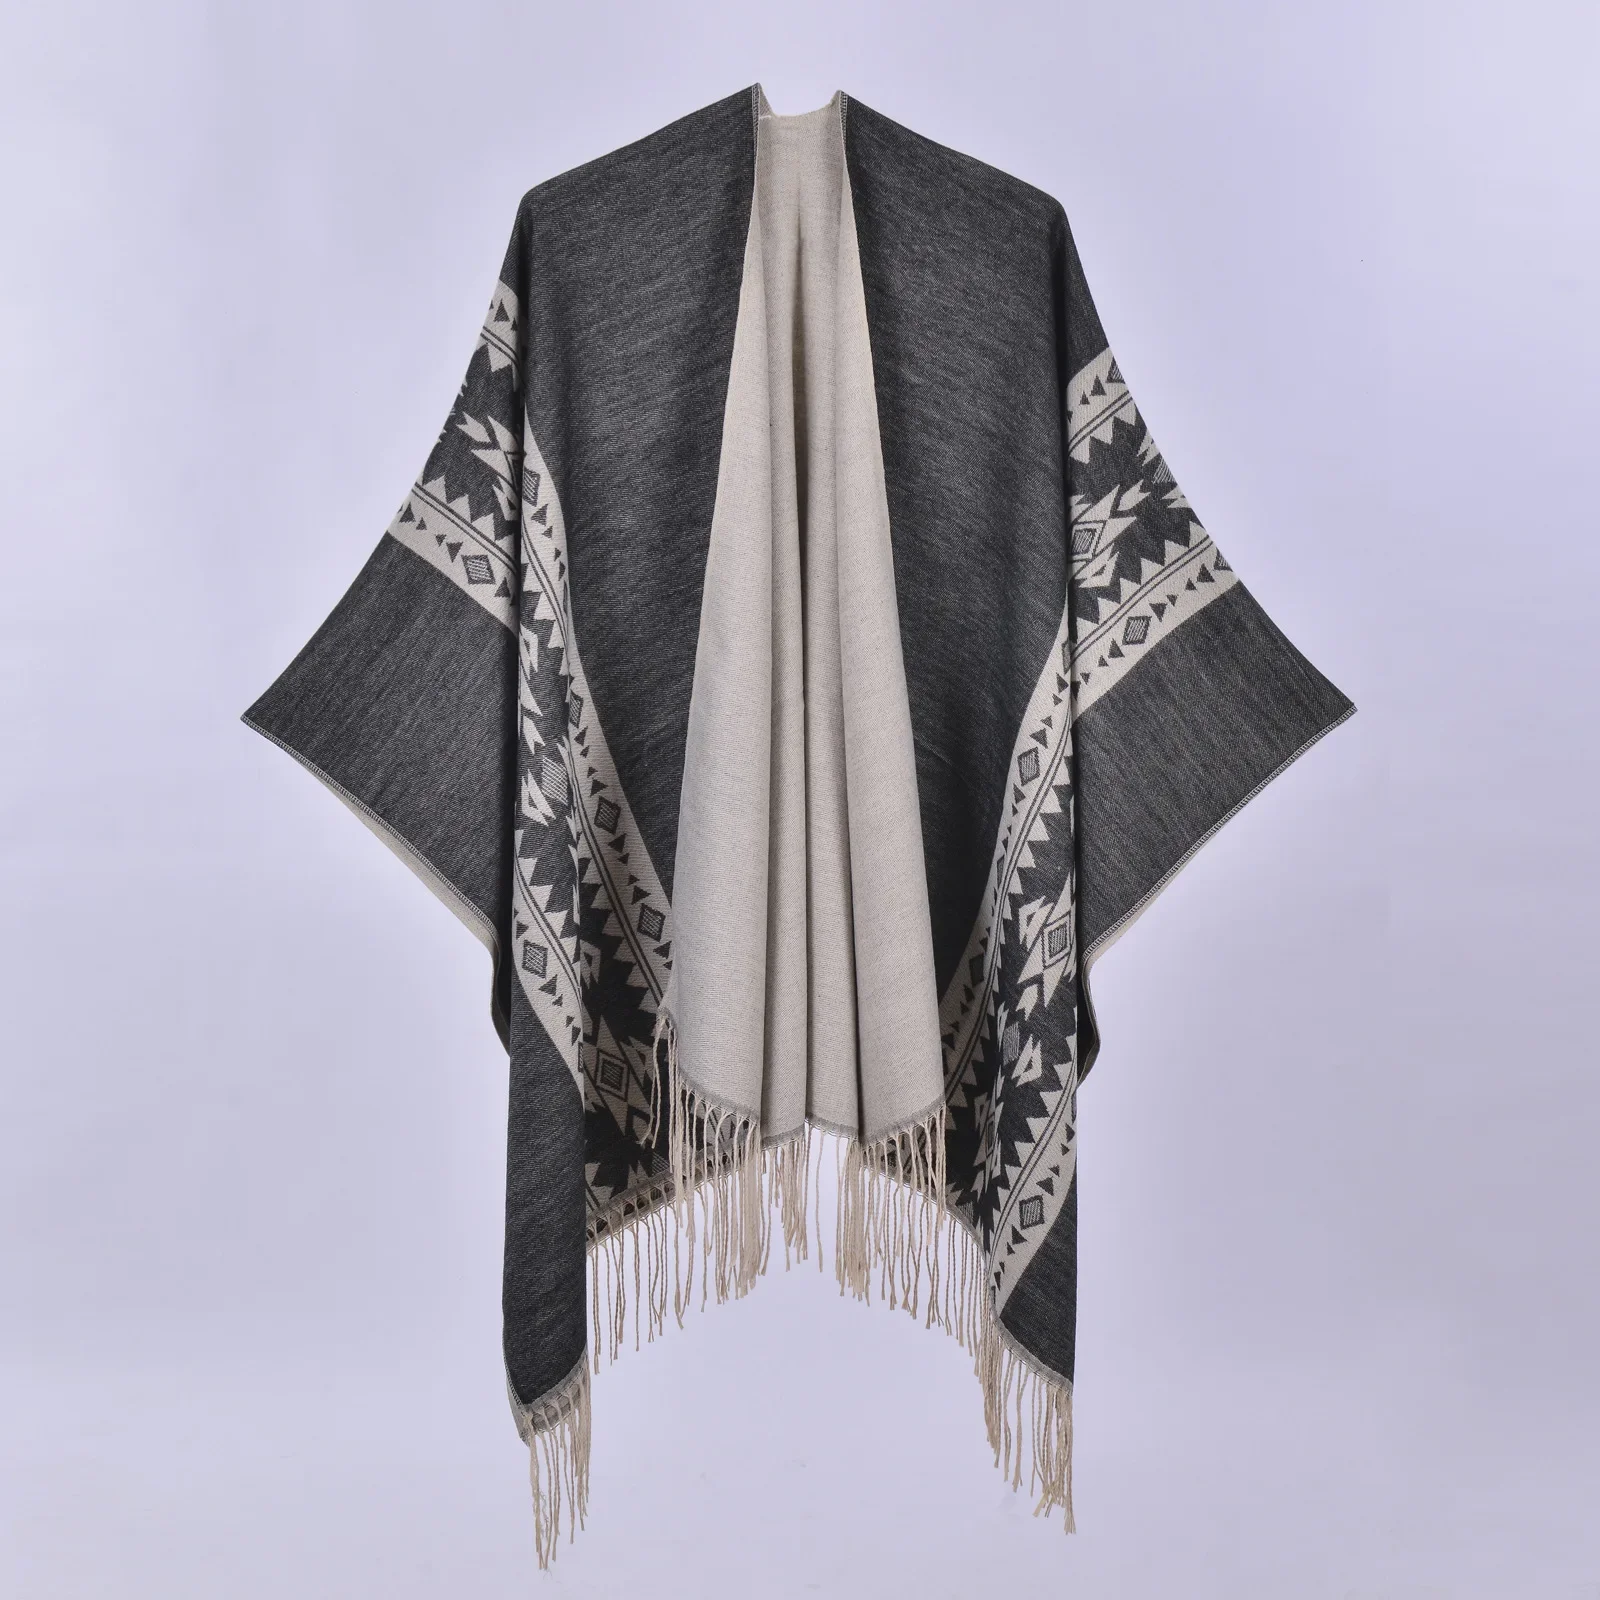 

Poncho New Autumn and Winter Shawl Scarf New Jacquard Tassel Knitted Cloak Retro Ethnic Cloaks Lady Capes